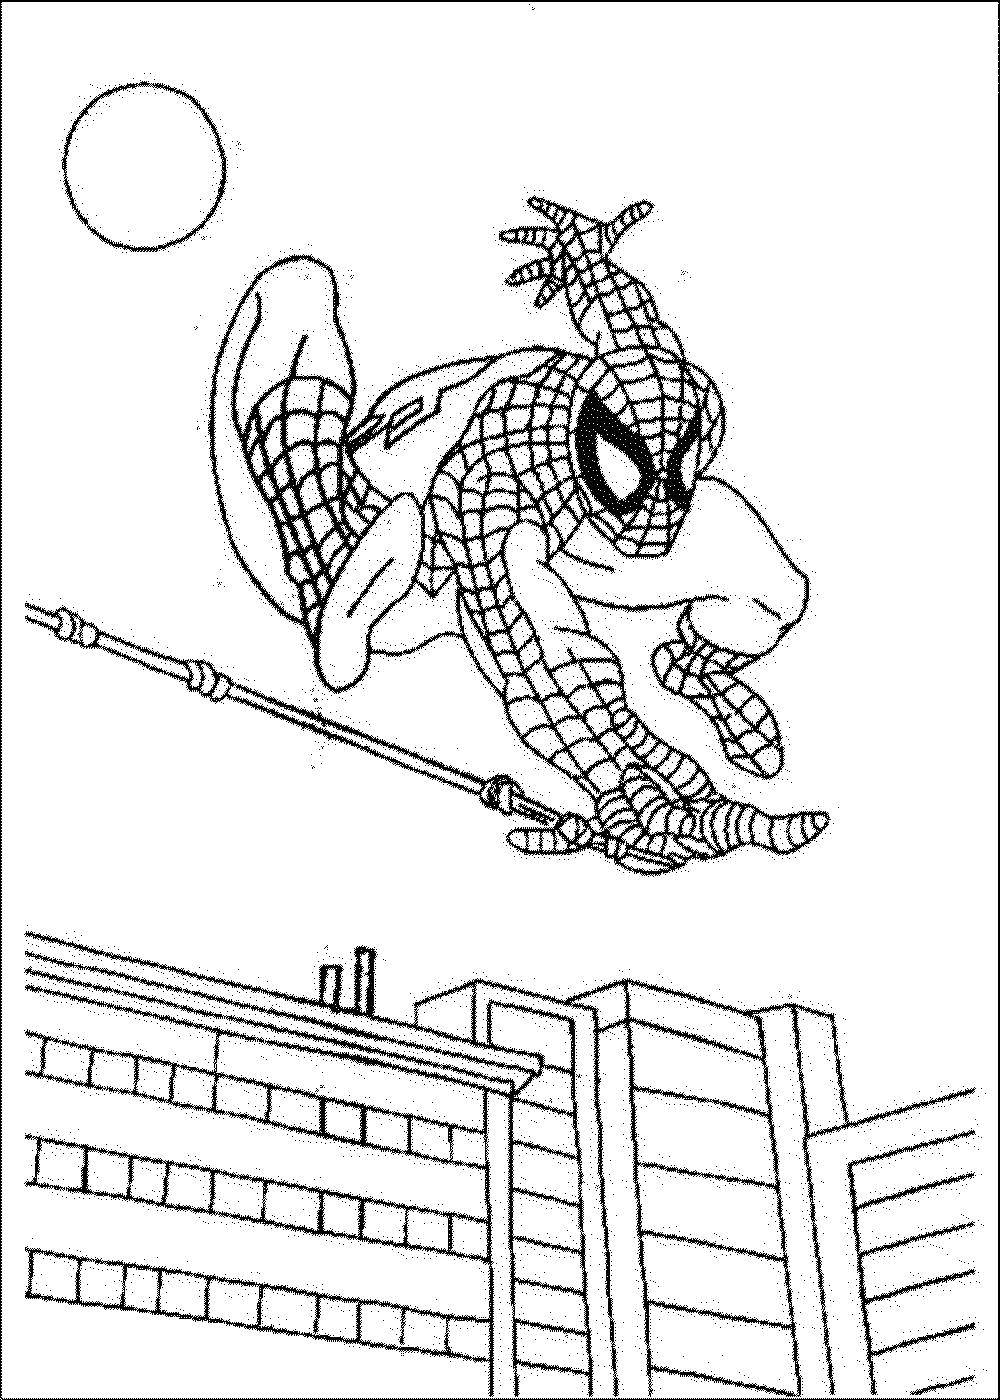 Coloring Spiderman. Category For boys . Tags:  film, cartoon, Spiderman, Spiderman.